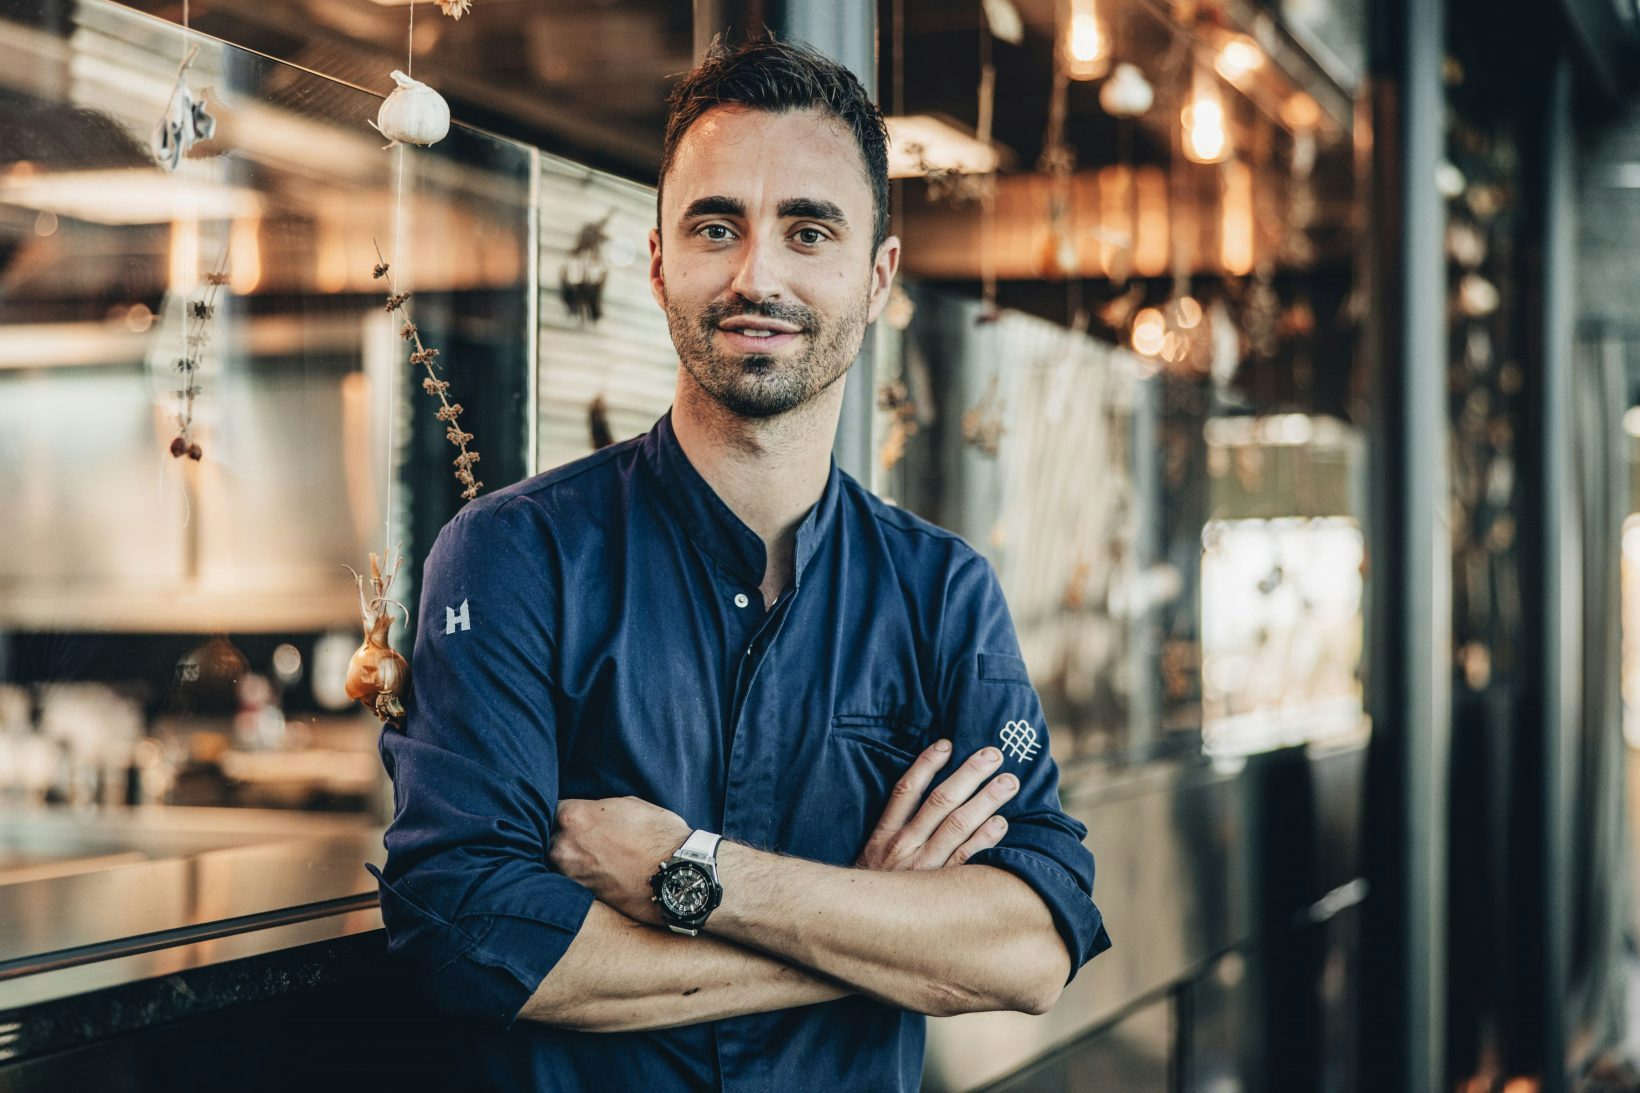 Silvio Germann, the young chef with a dazzling gastronomic rise